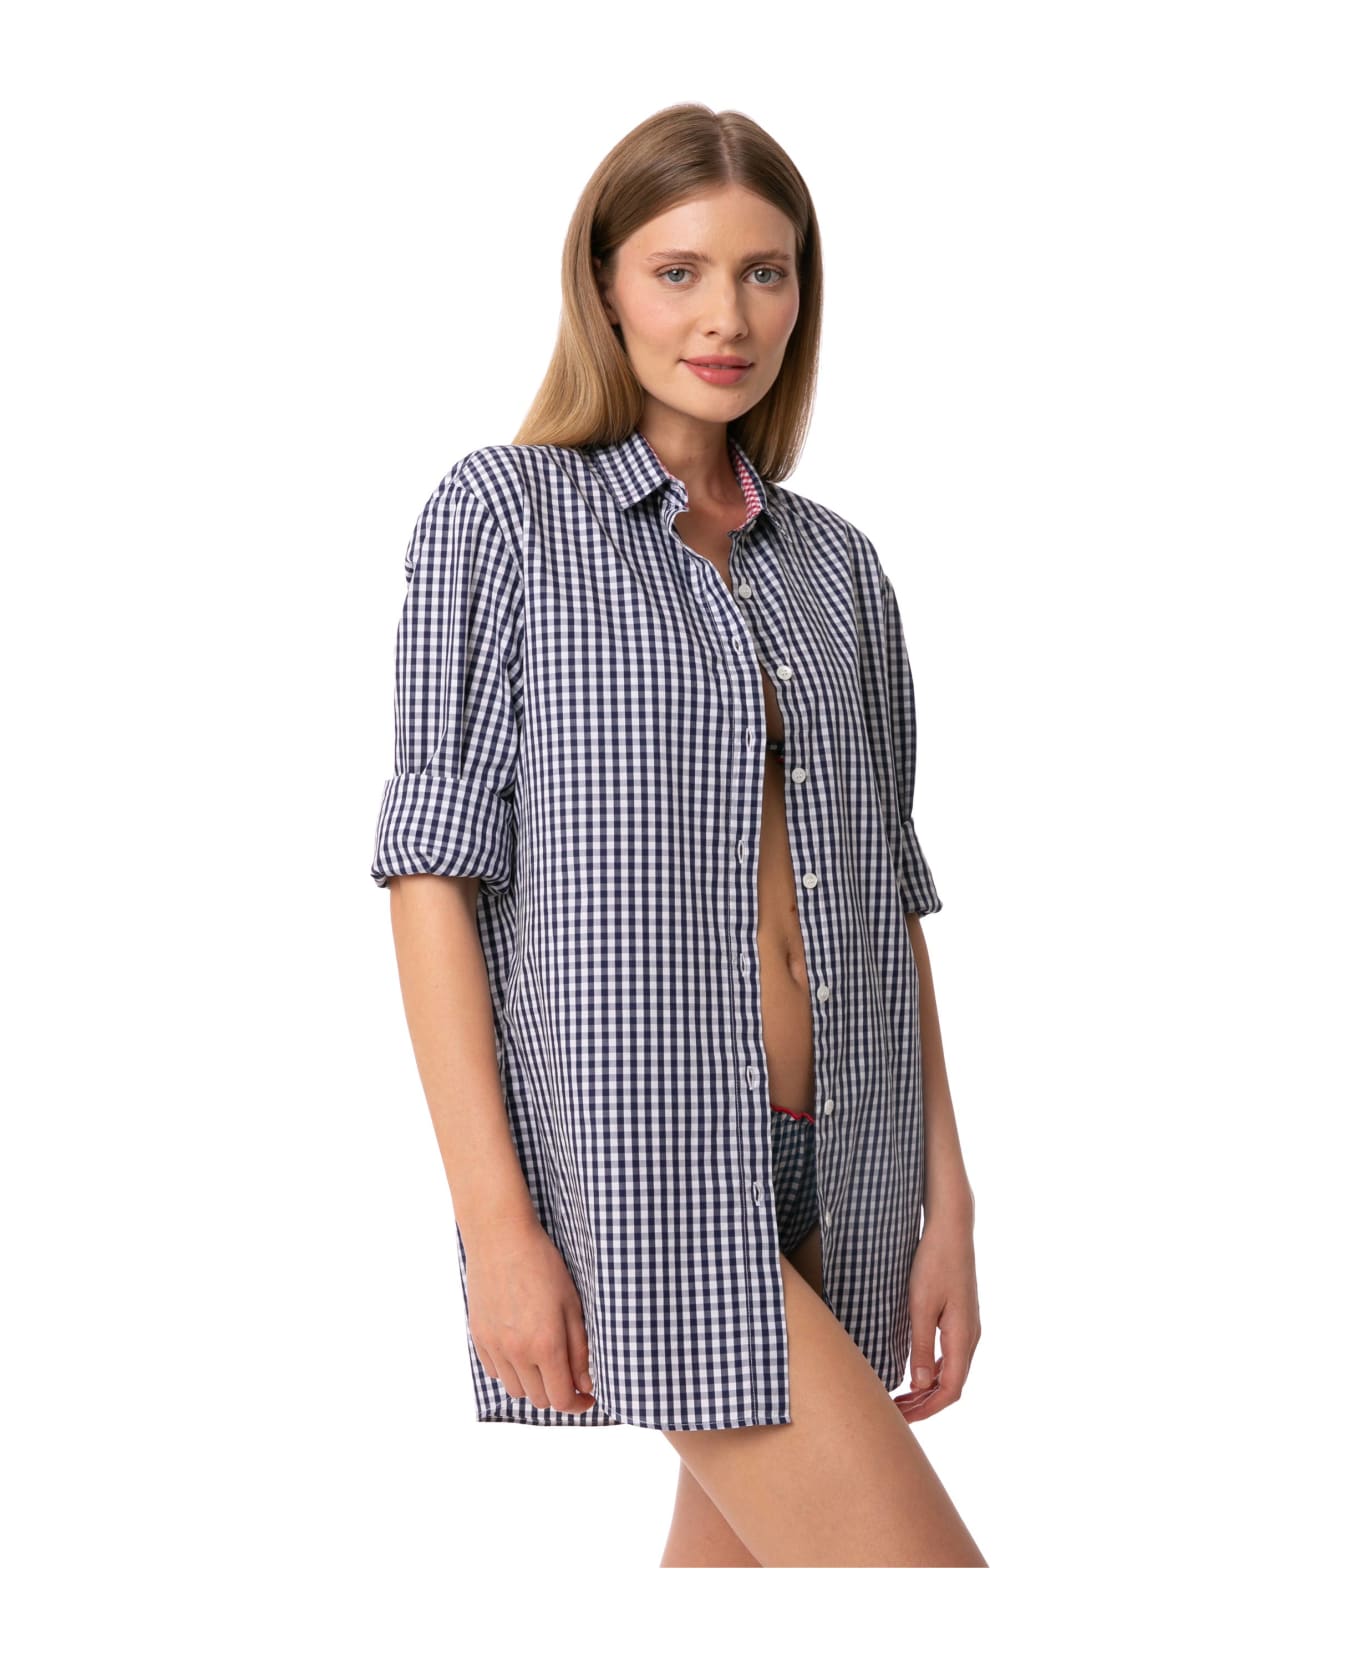 MC2 Saint Barth Blue Navy Gingham Cotton Shirt With Embroidery - BLUE